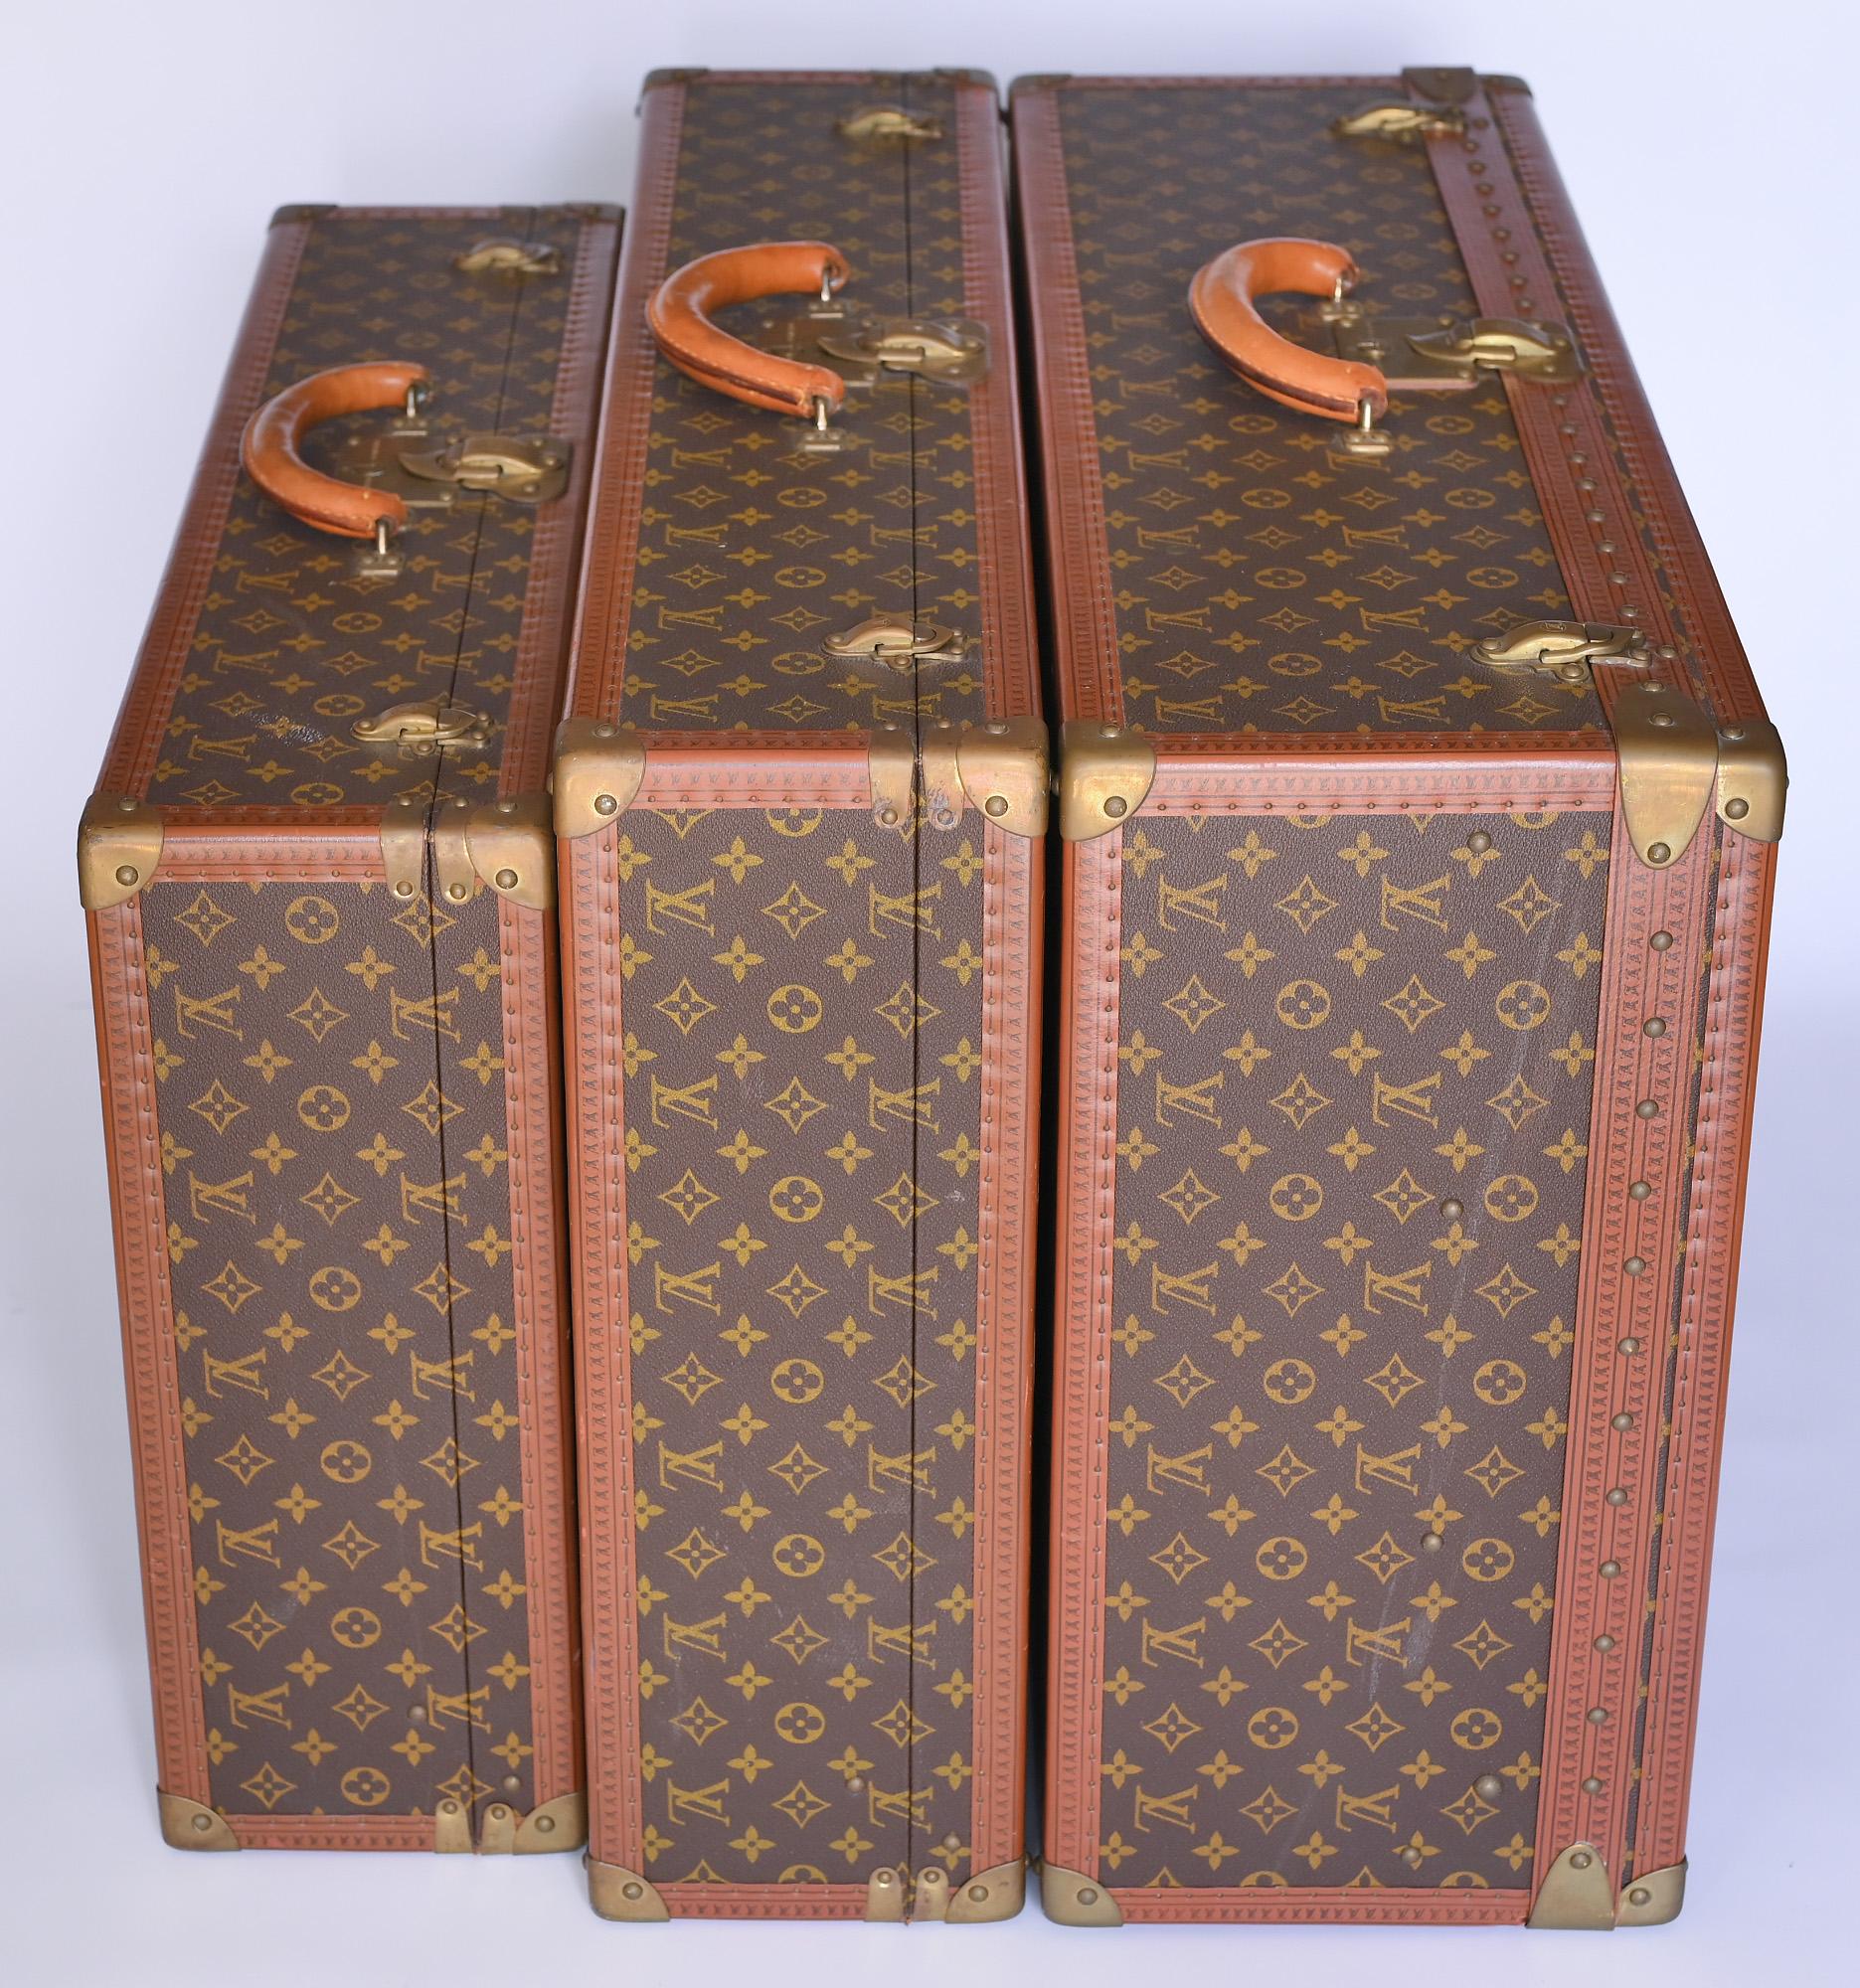 Three Louis Vuitton suitcases, Alzer 80 with removable tray, Alzer 80, Alzer 70 in wonderful, well-kept condition with original working keys
Each suitcase has a Louis Vuitton label and its serial number
906527 Alzer 80 80 cm x 17.5 cm 52.5 cm
909481